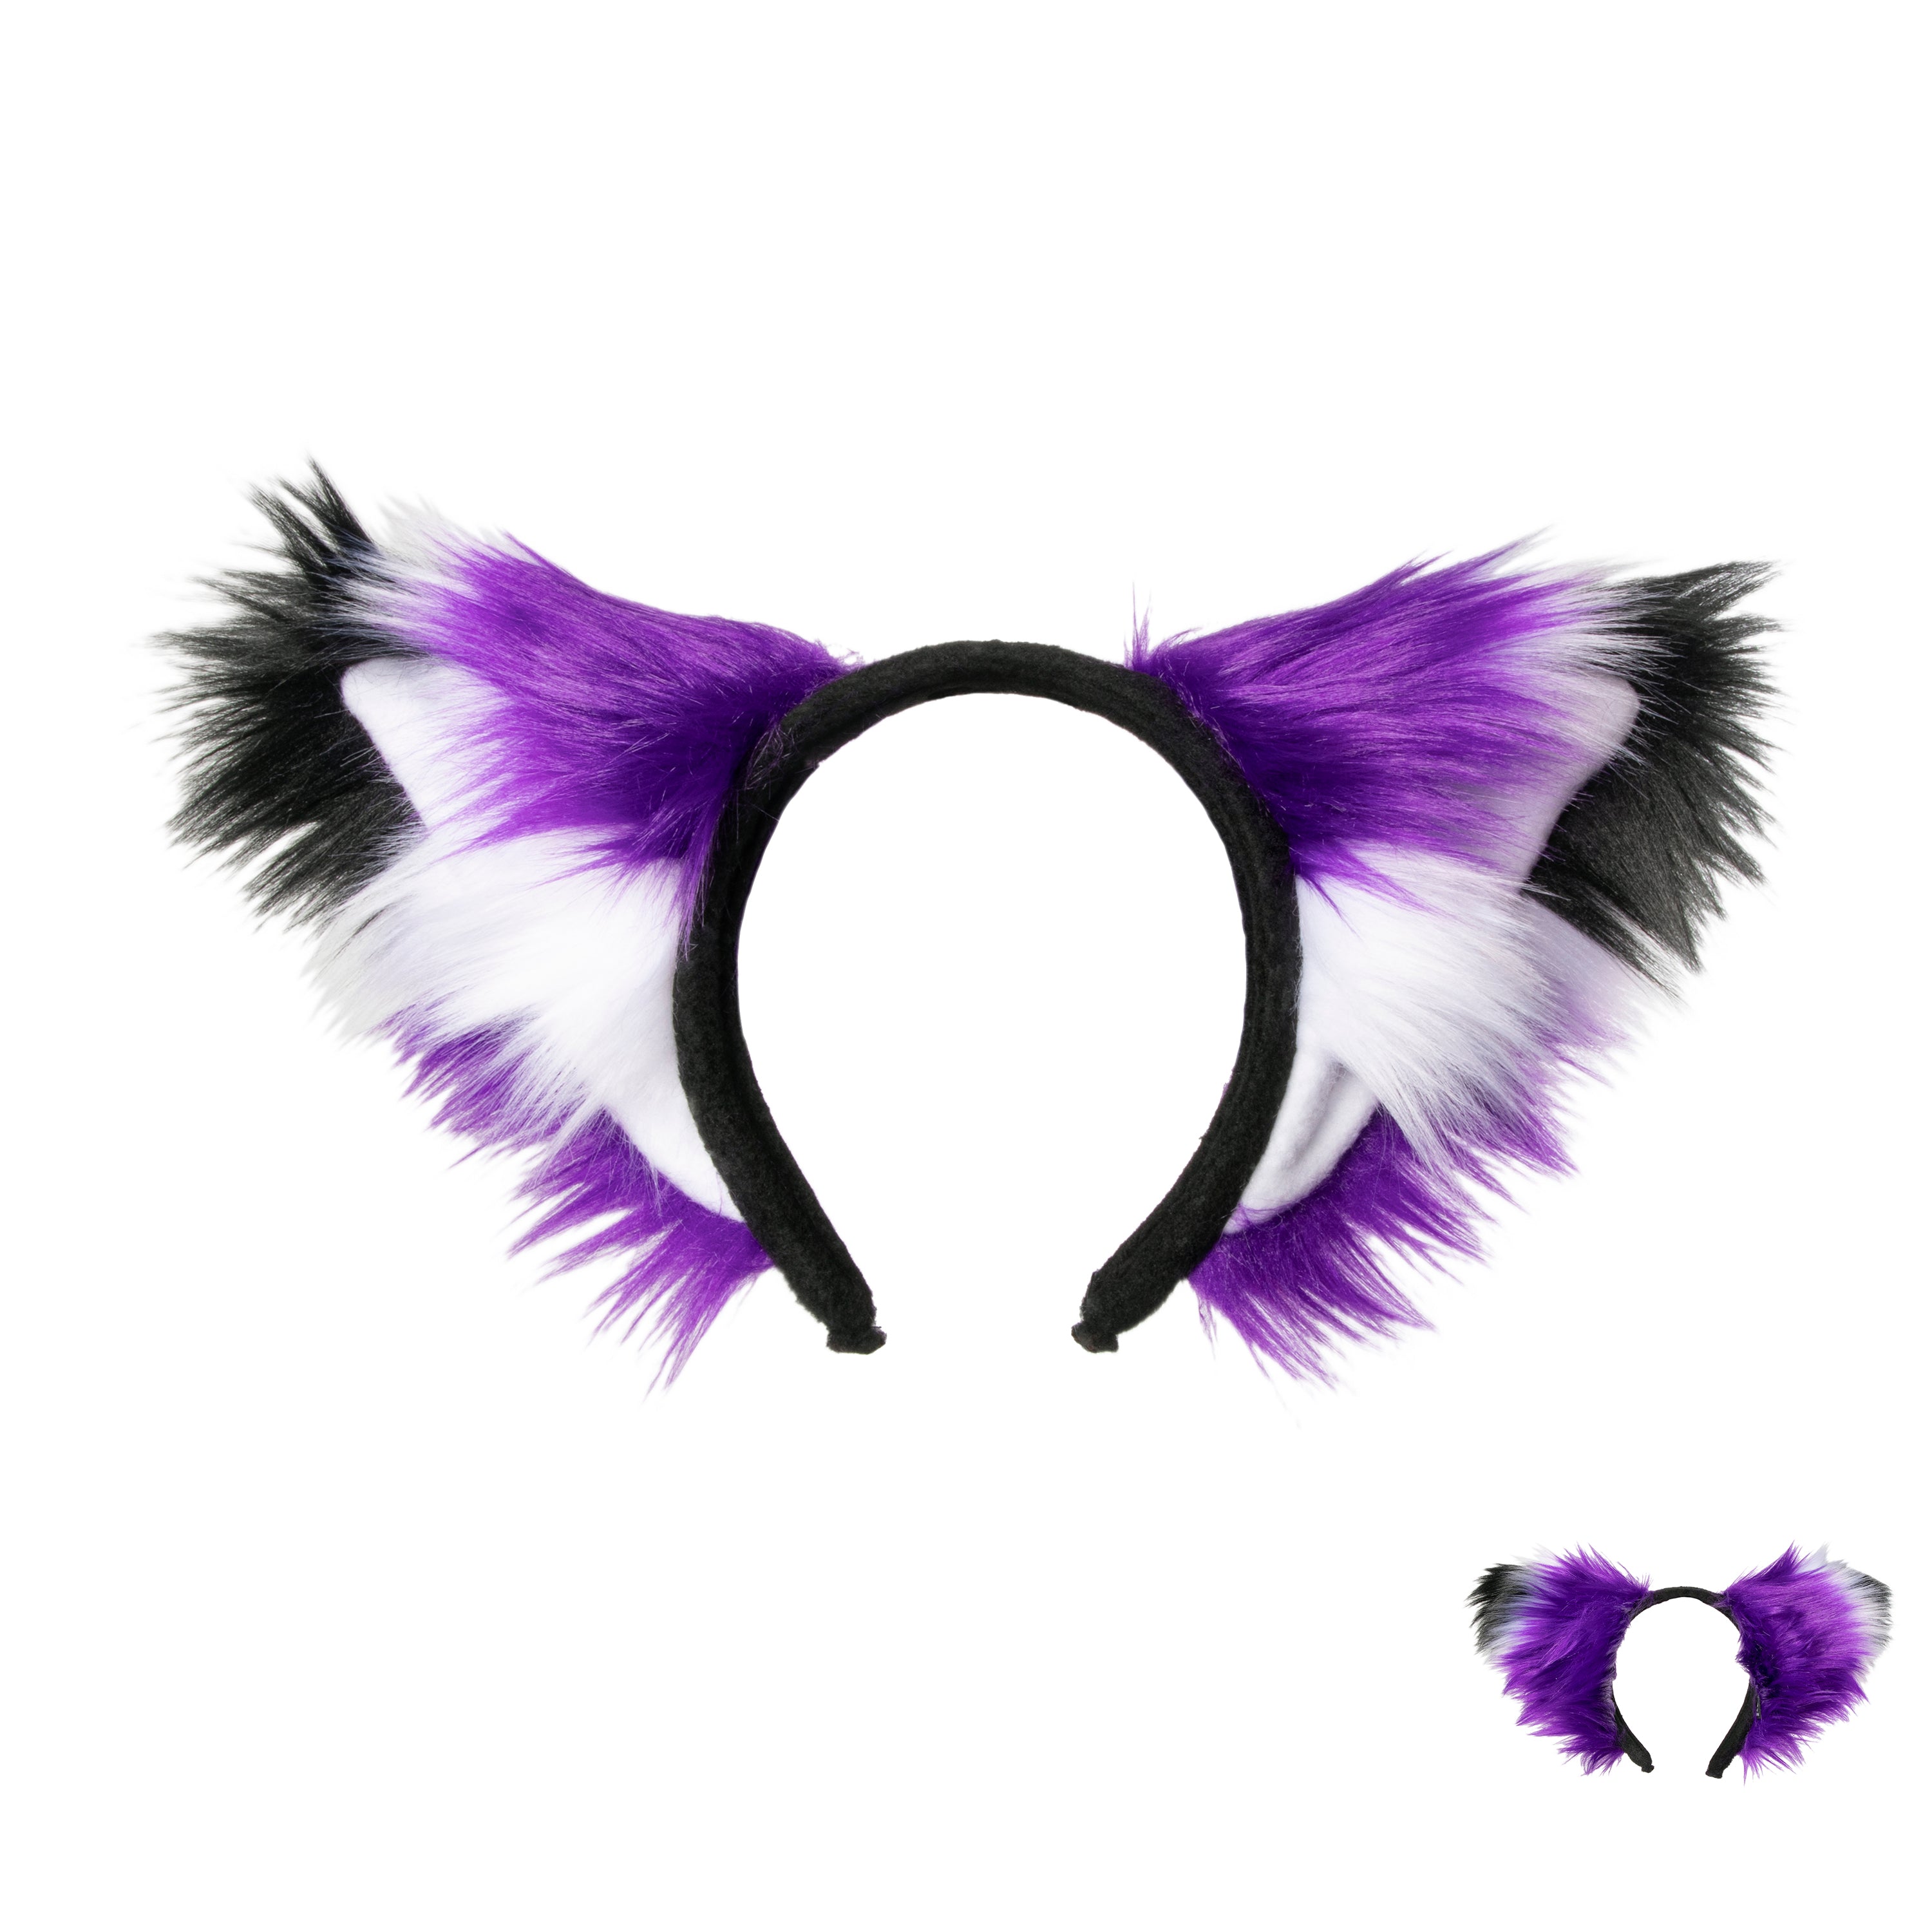 Pawstar furry purple fox plus ear headband with white and black accent. Made from vegan friendly faux fur and fleece.